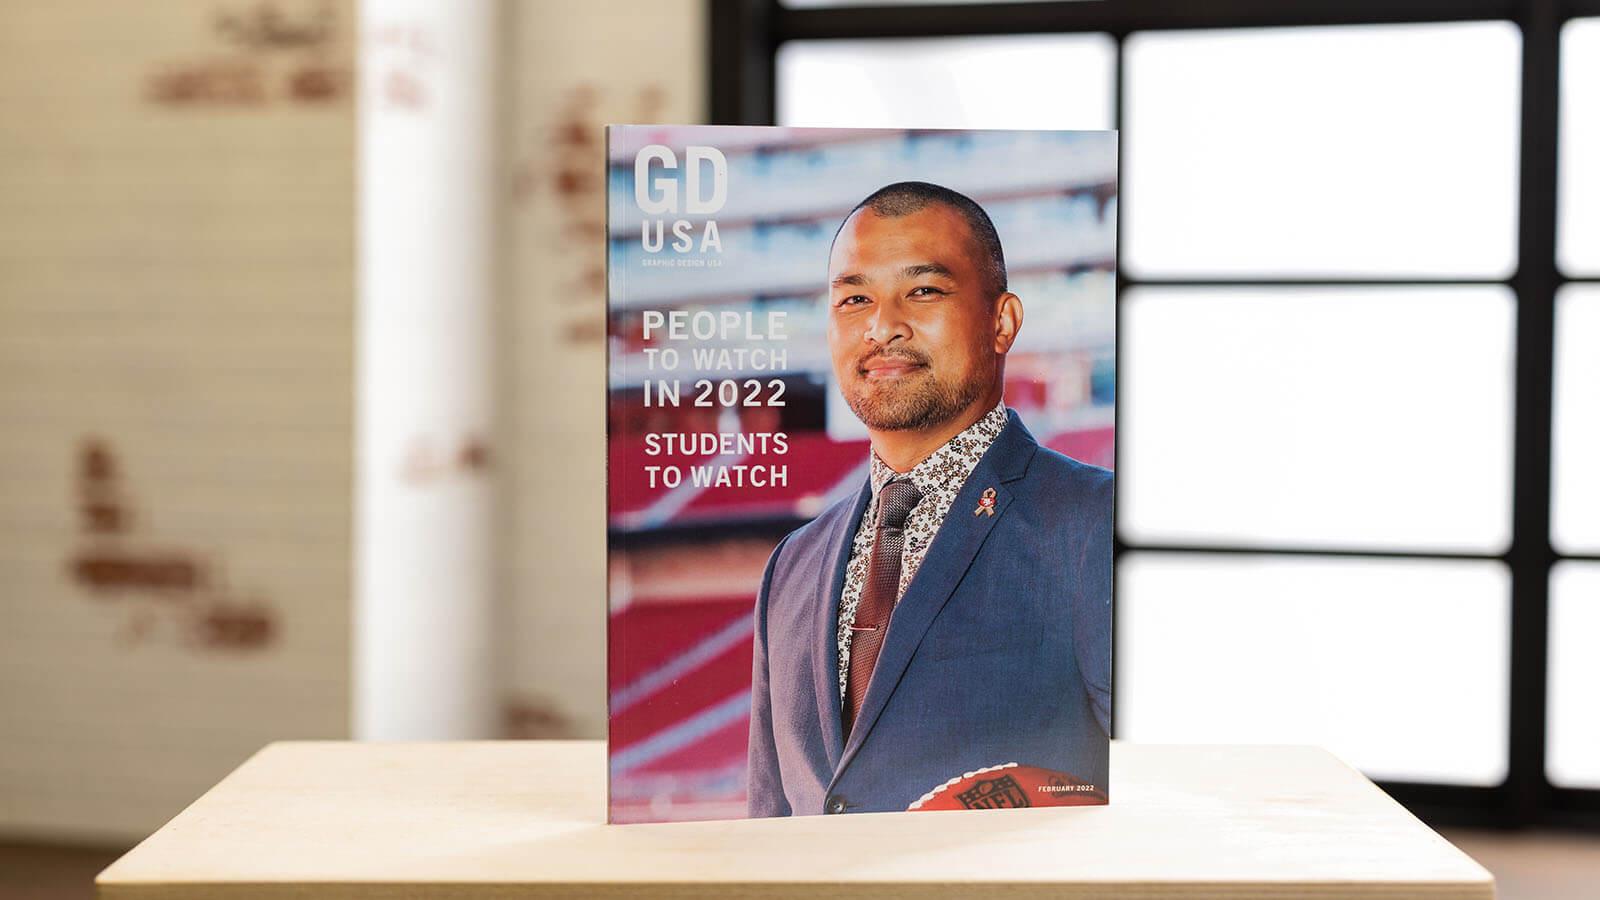 A Graphic Design USA magazine stands upright on a desk in a backlit room. On the cover, a man wearing a blue suit with a pink ribbon pin and holding an NFL football smiles for the camera. The cover reads, People to Watch in 2022, Students to Watch.